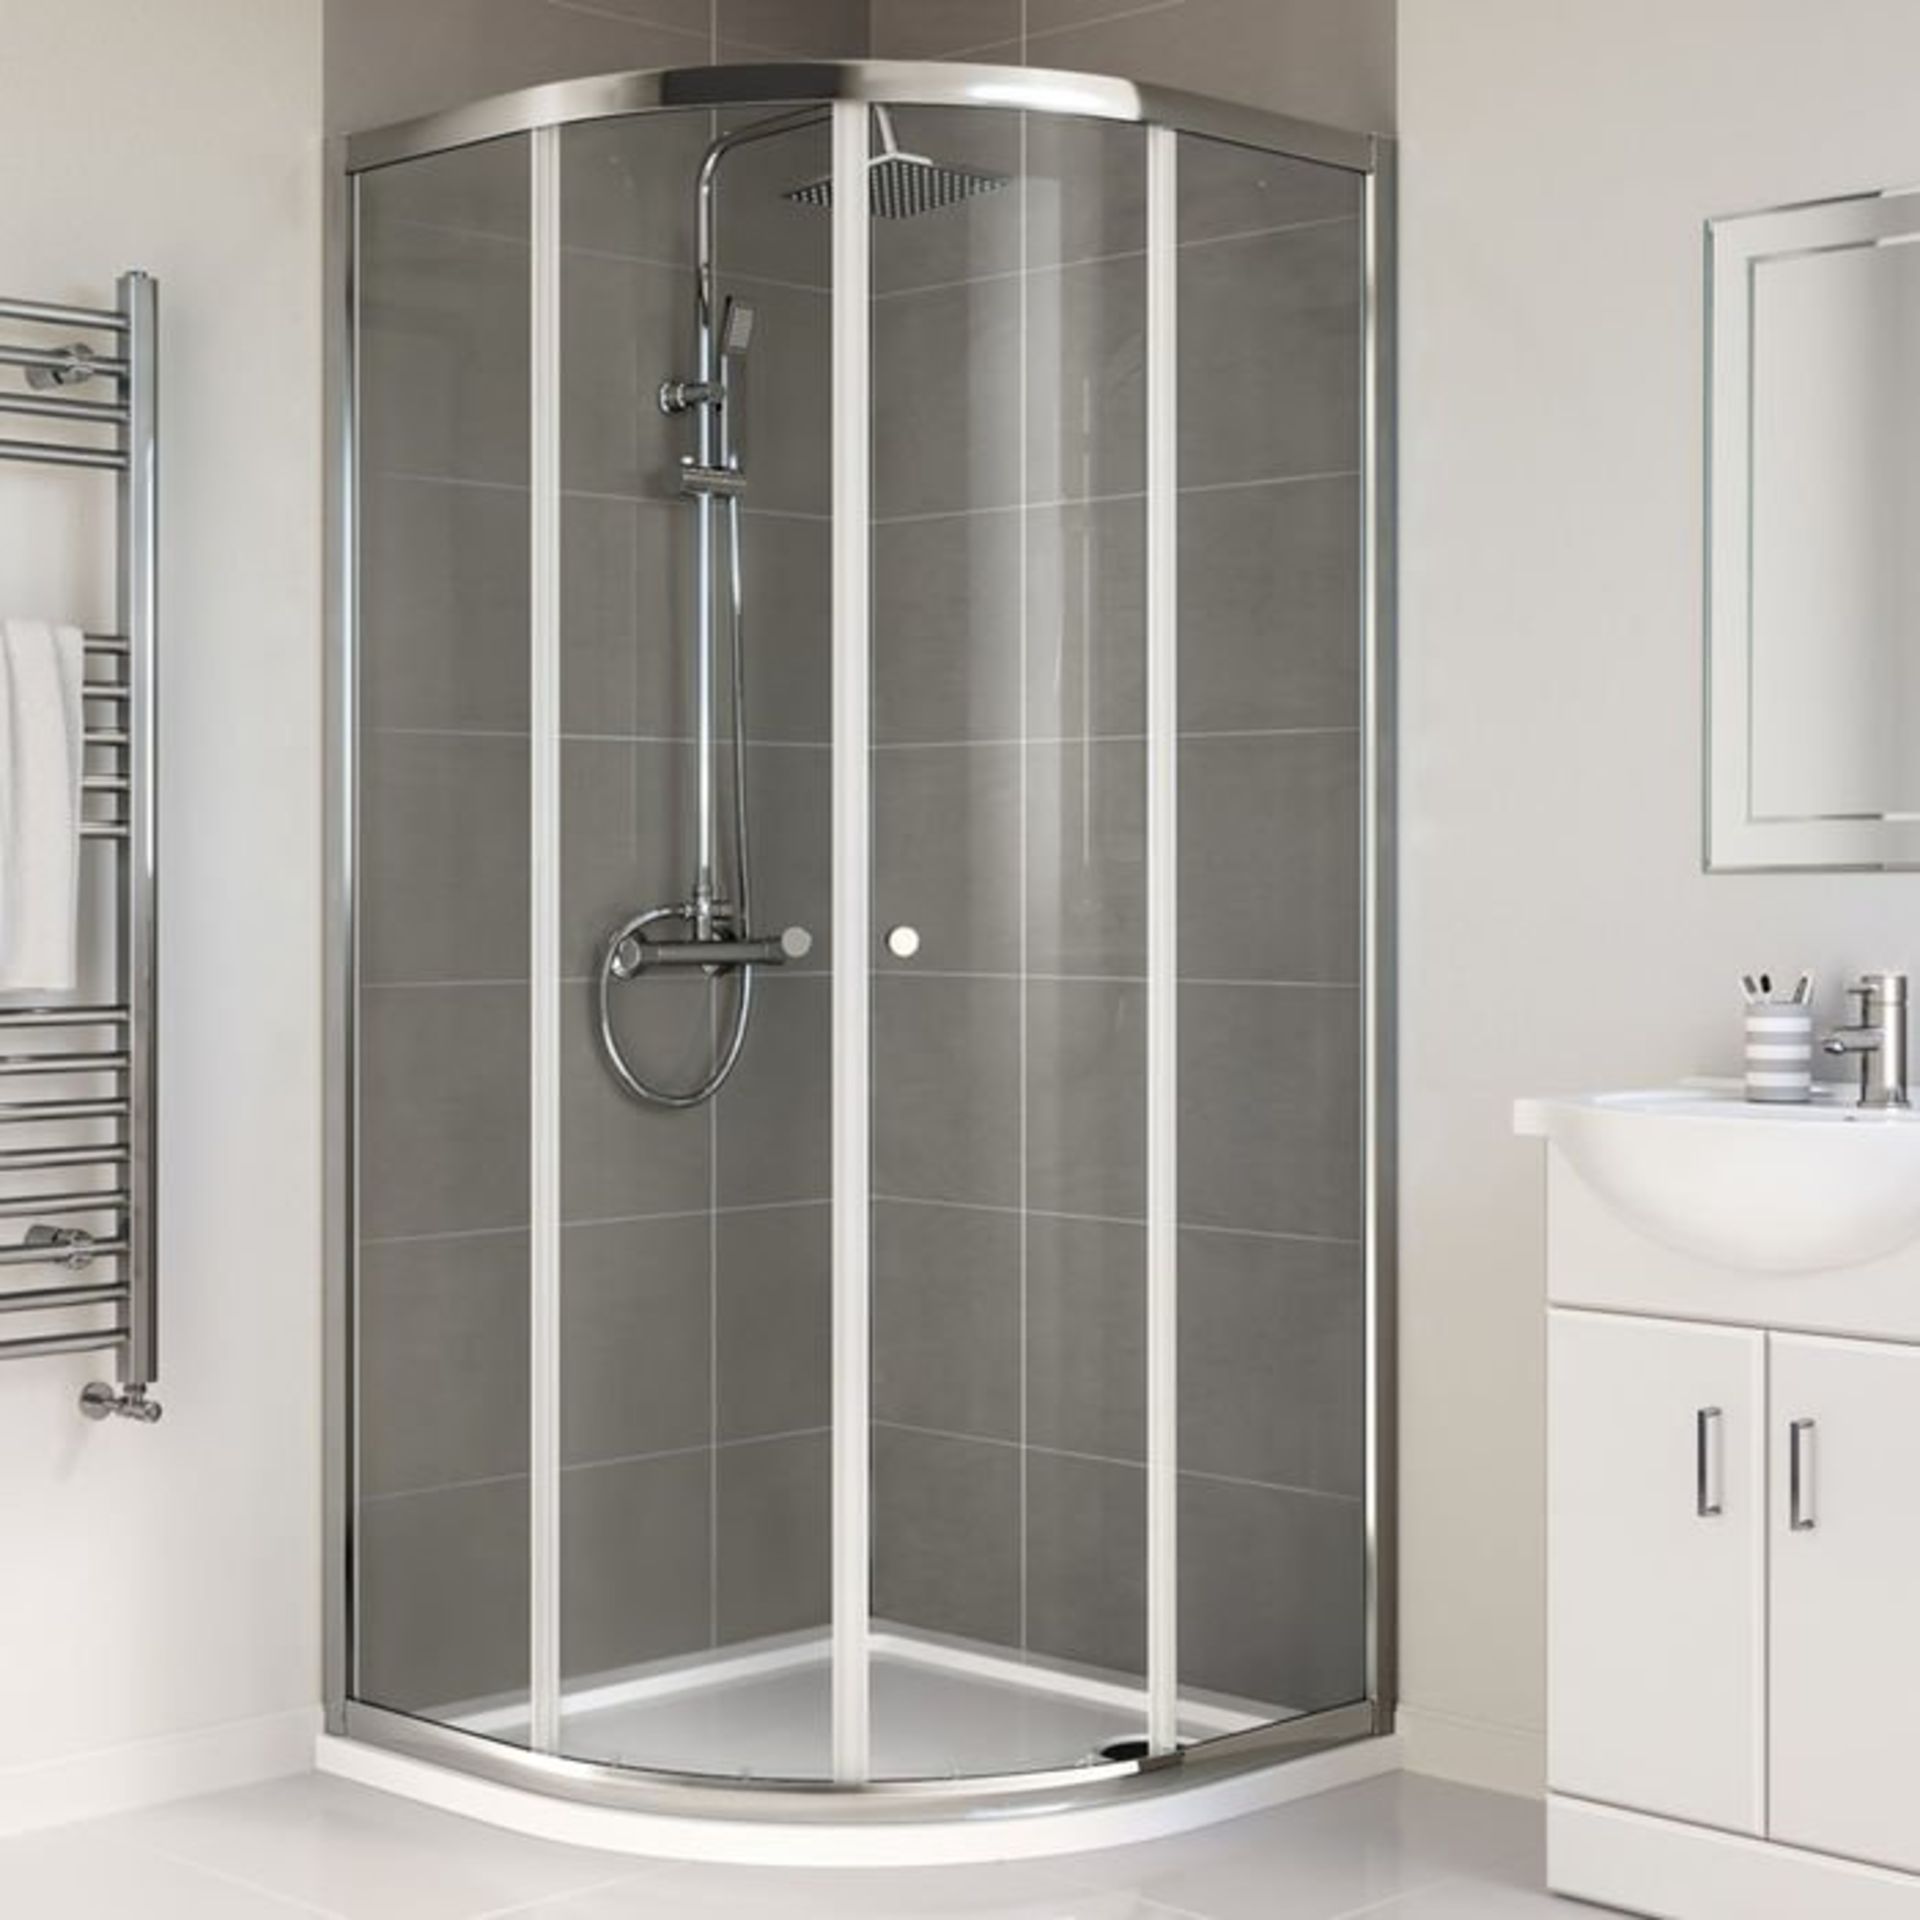 (G44) 800x800mm - Elements Quadrant Shower Enclosure RRP £199.99 4mm Safety Glass Fully waterproof